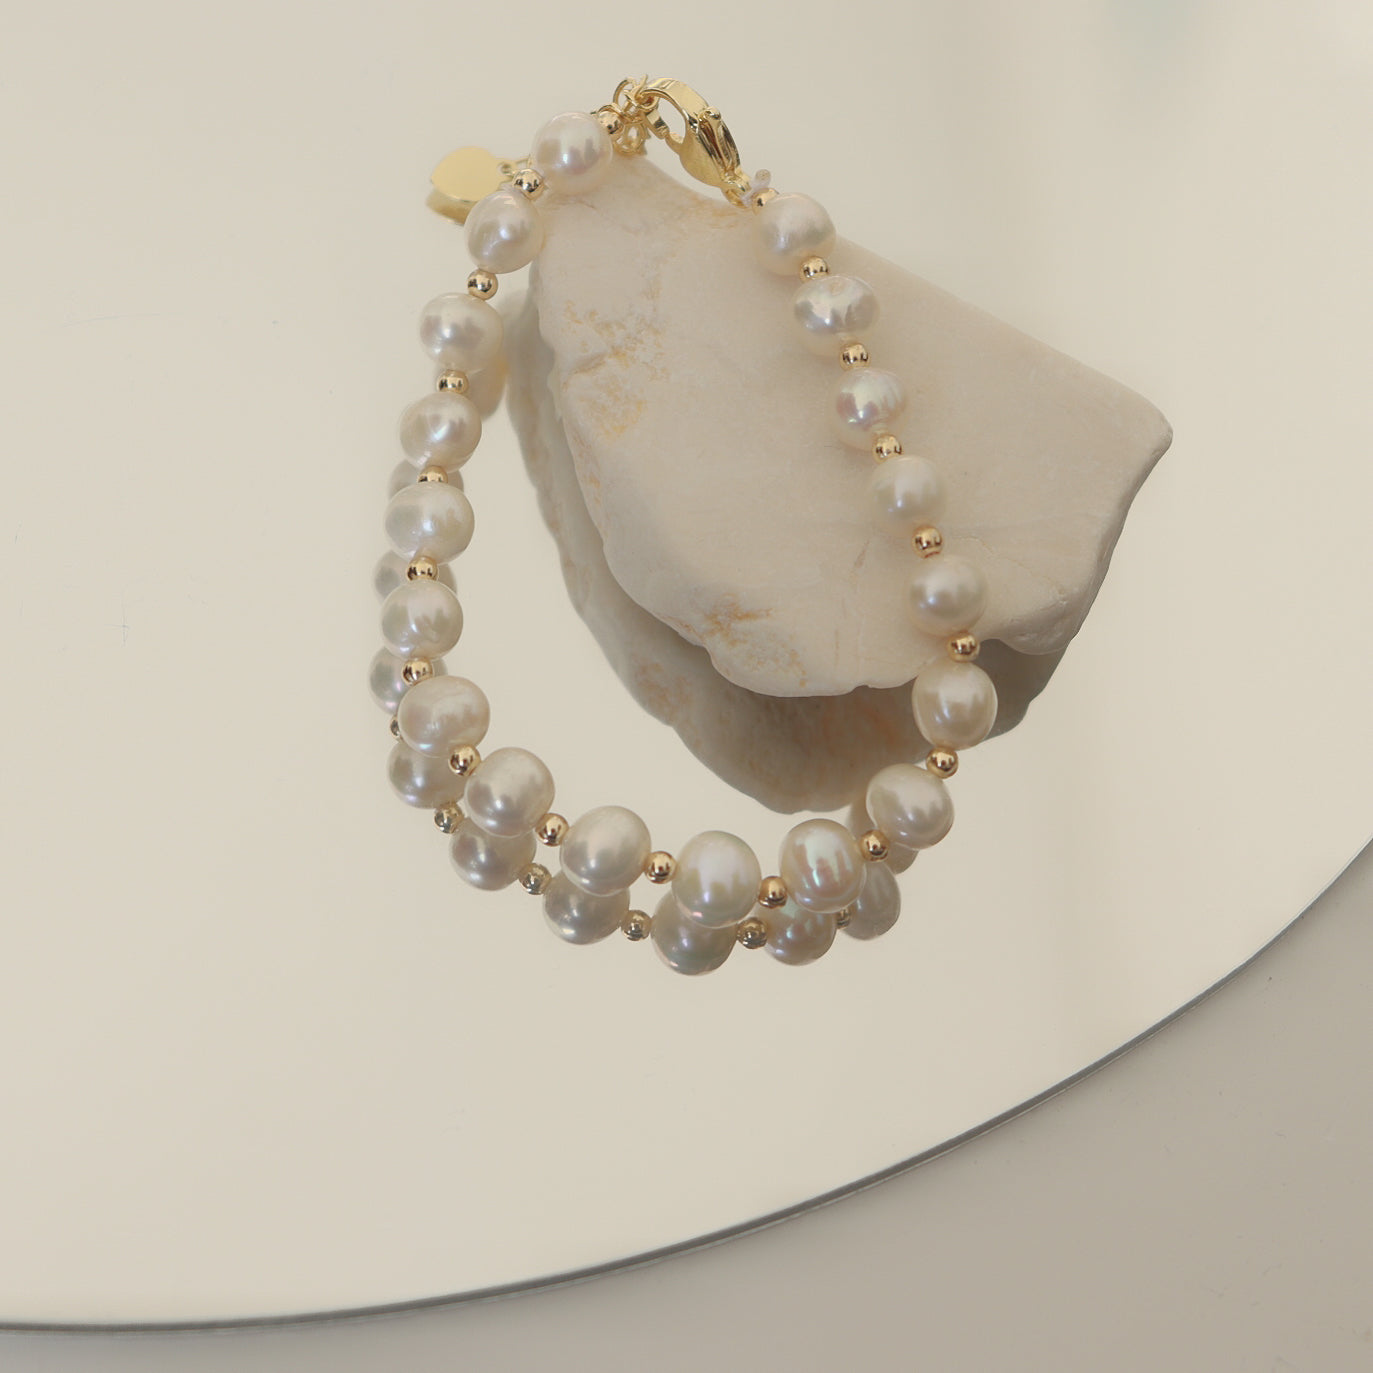 Exquisite Handmade Freshwater Pearl Beaded Bracelet - A Touch of Elegance for Every Occasion